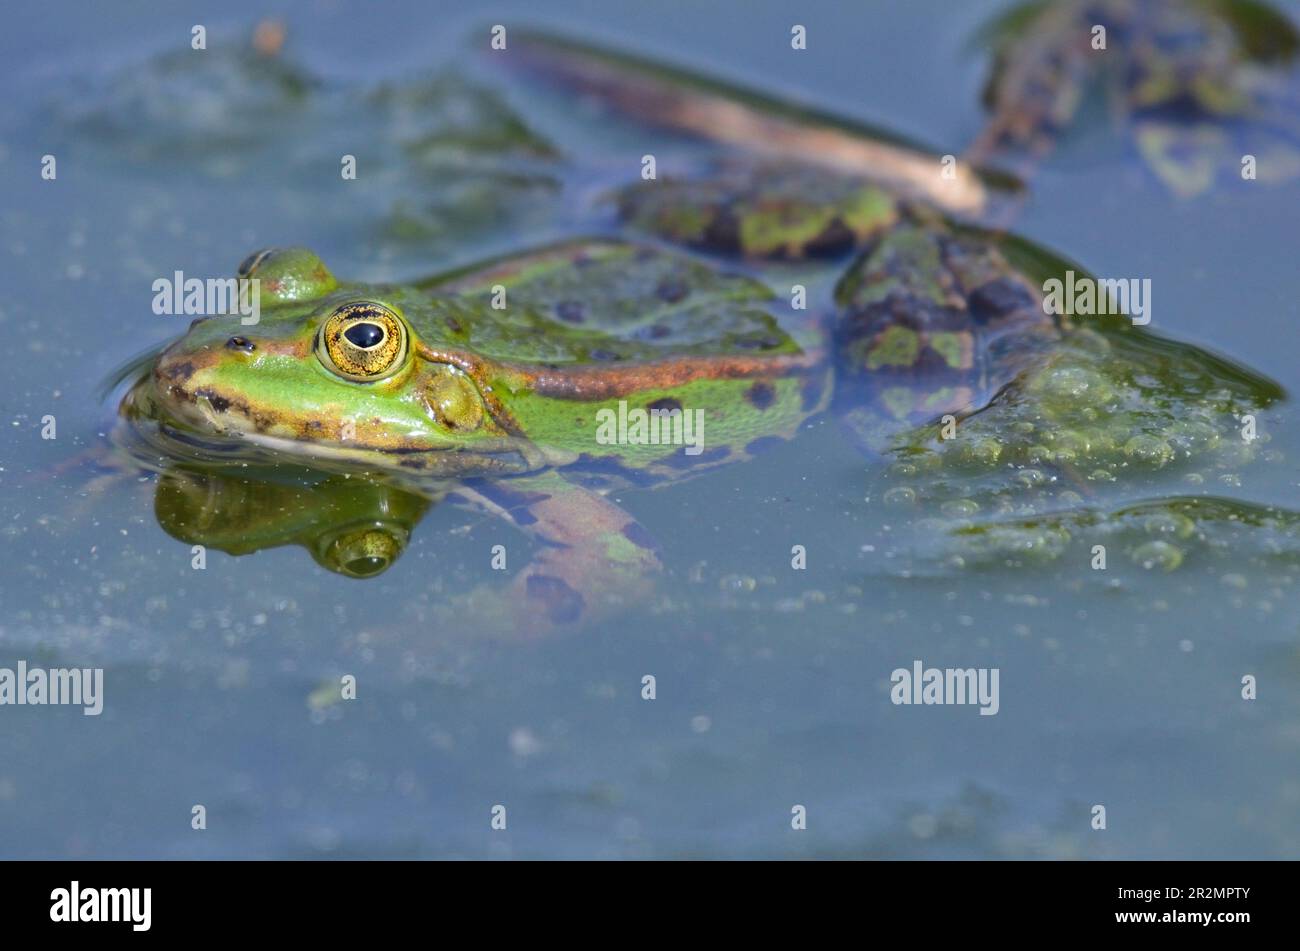 Portrait of an edible frog at the botanical garden in Kassel Stock Photo